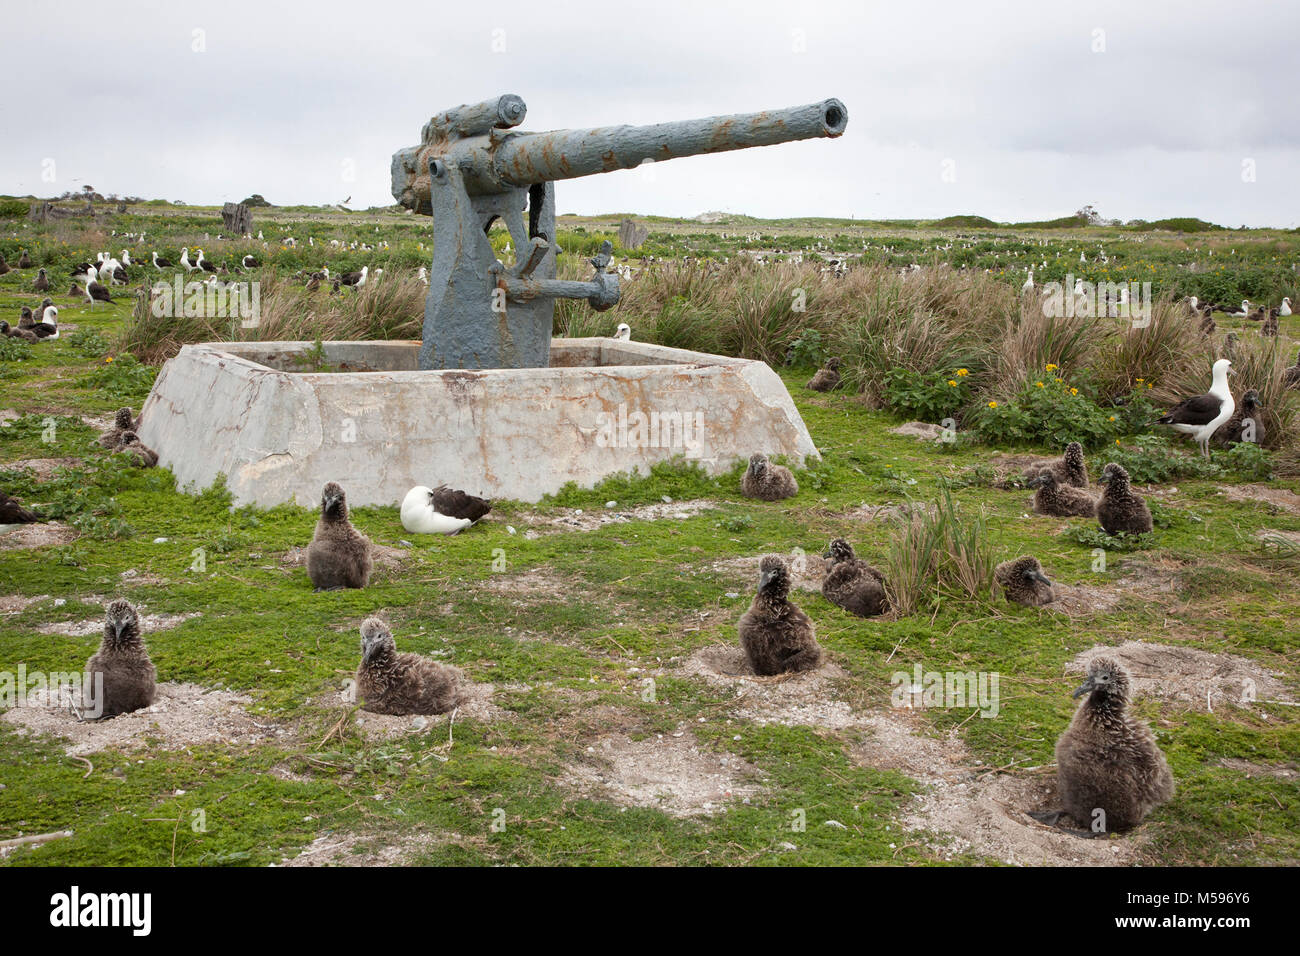 World War II 3' anti-aircraft gun of naval air station on Midway Atoll from 1942 - 1945 and Laysan Albatross nesting colony on Eastern Island Stock Photo